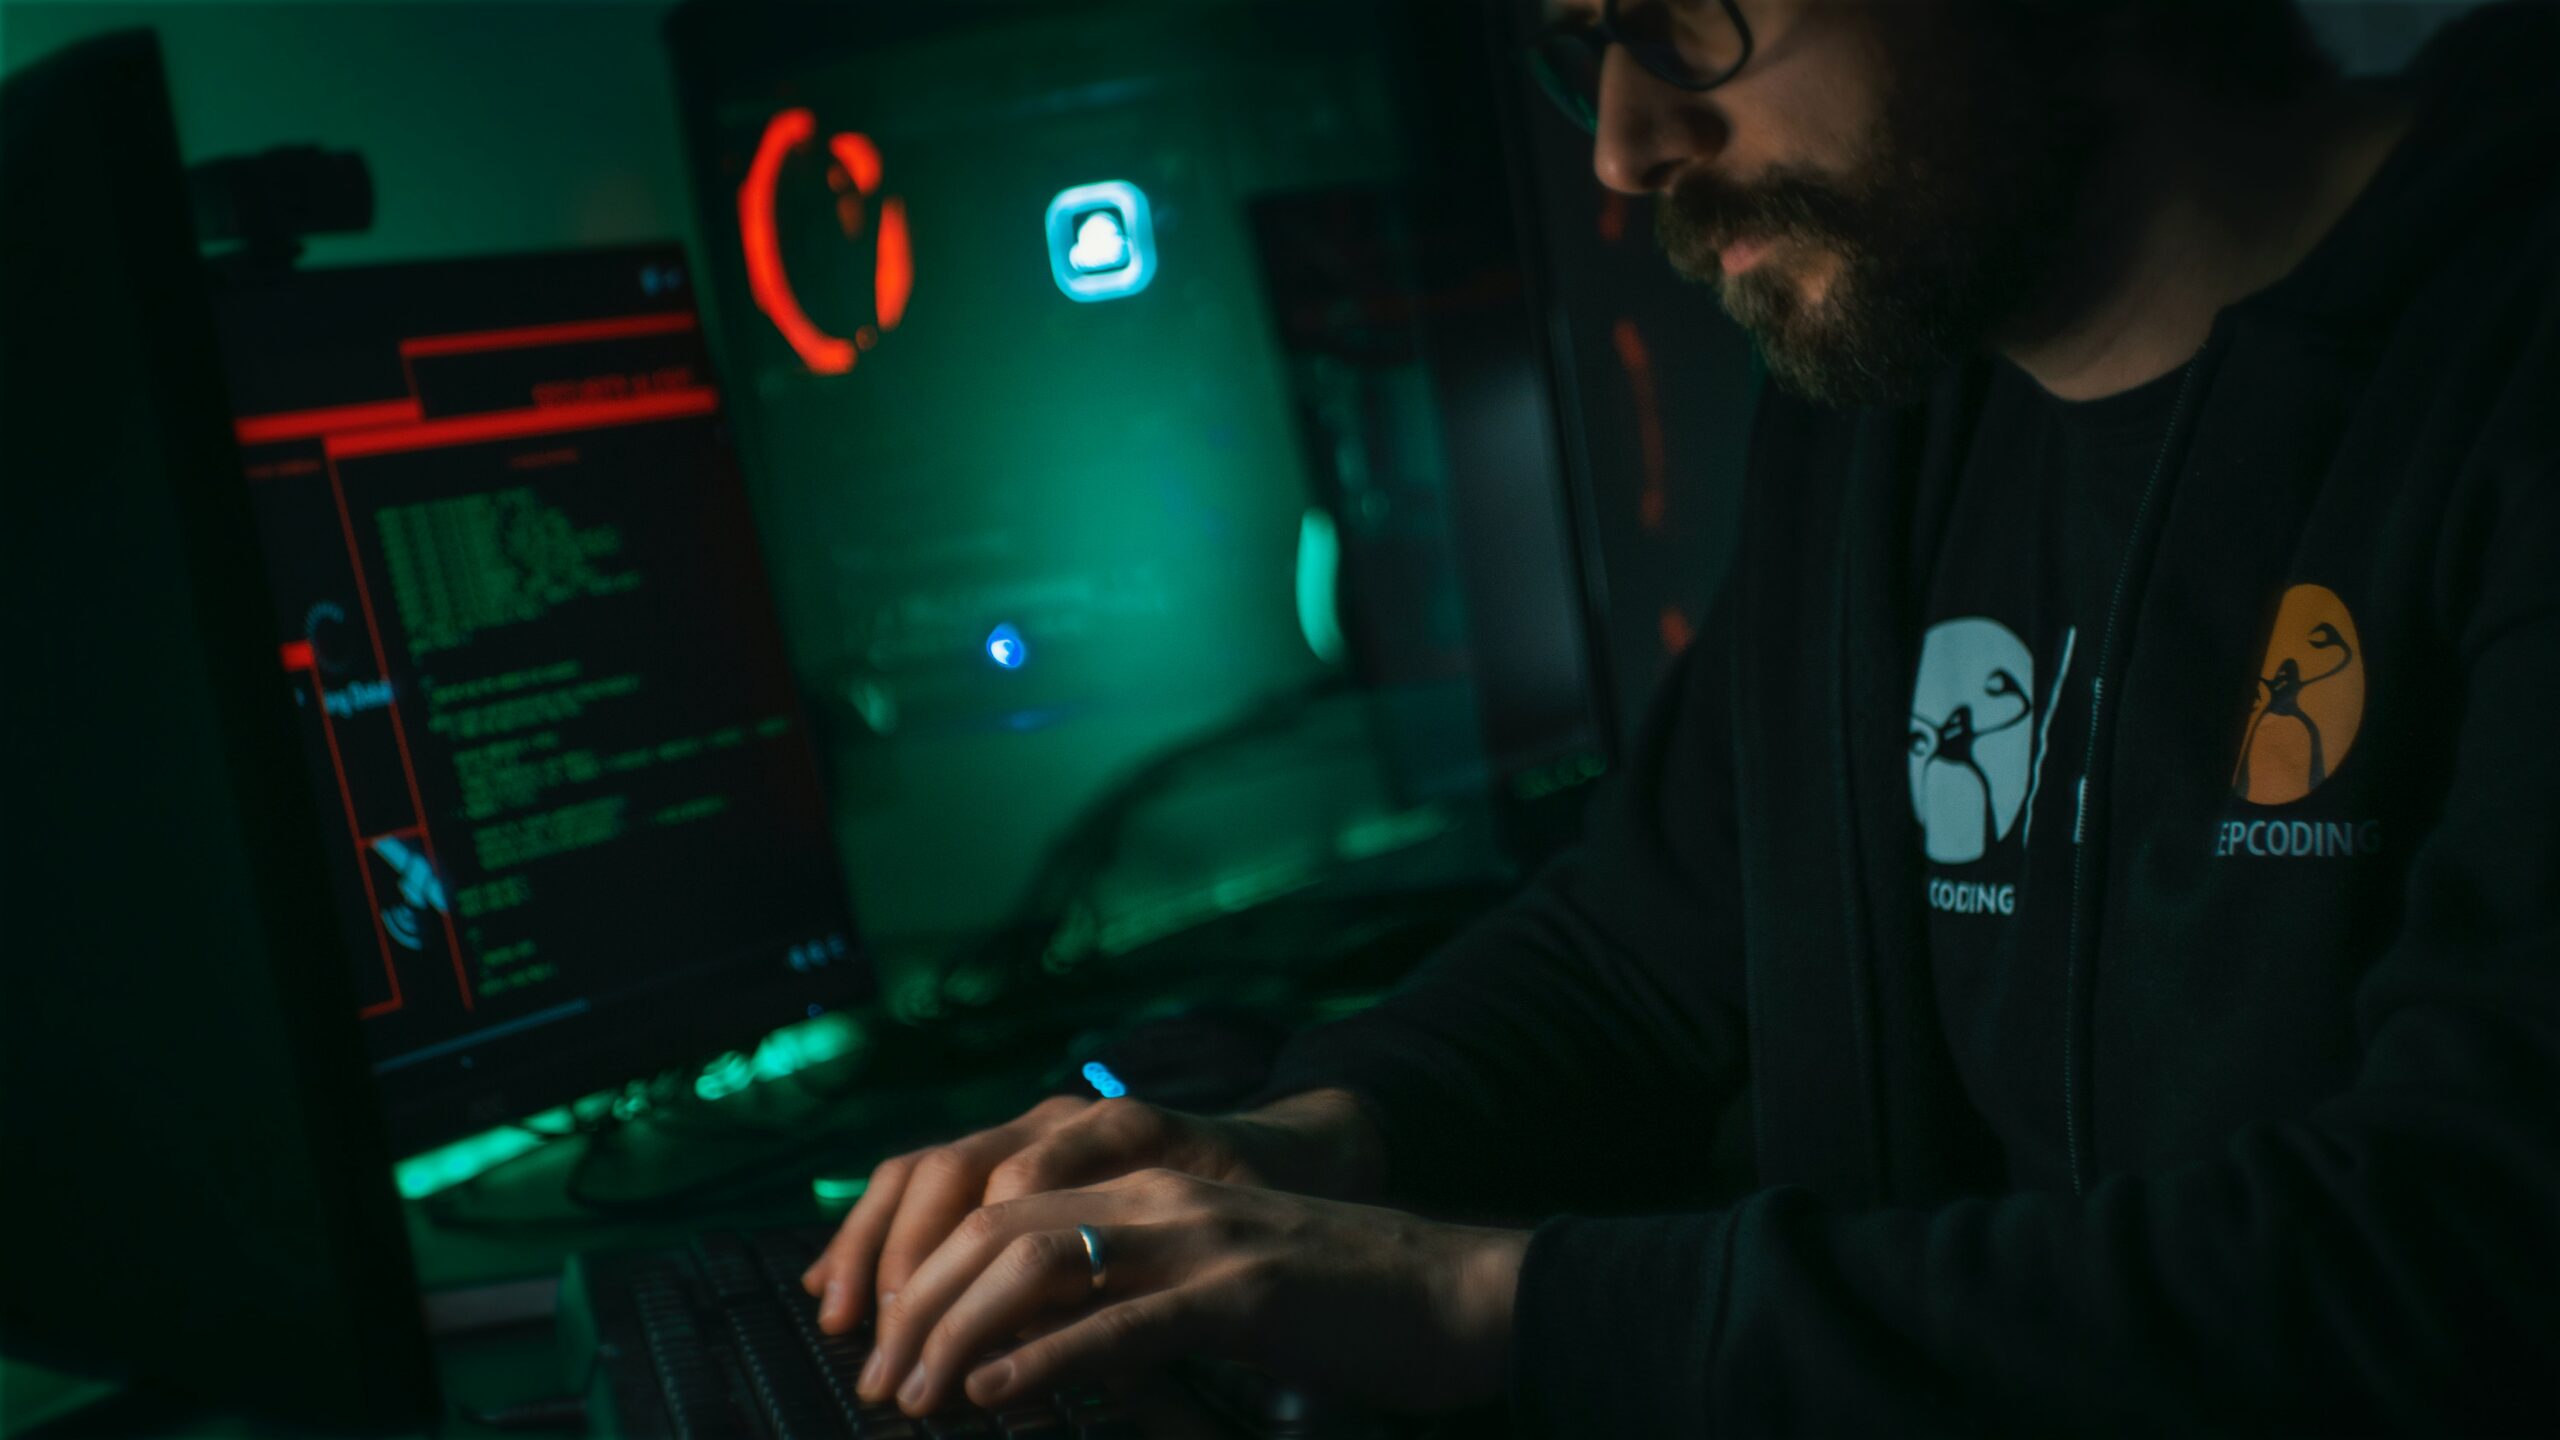 Global firm TryHackMe launches unique hands-on Red Teaming security training